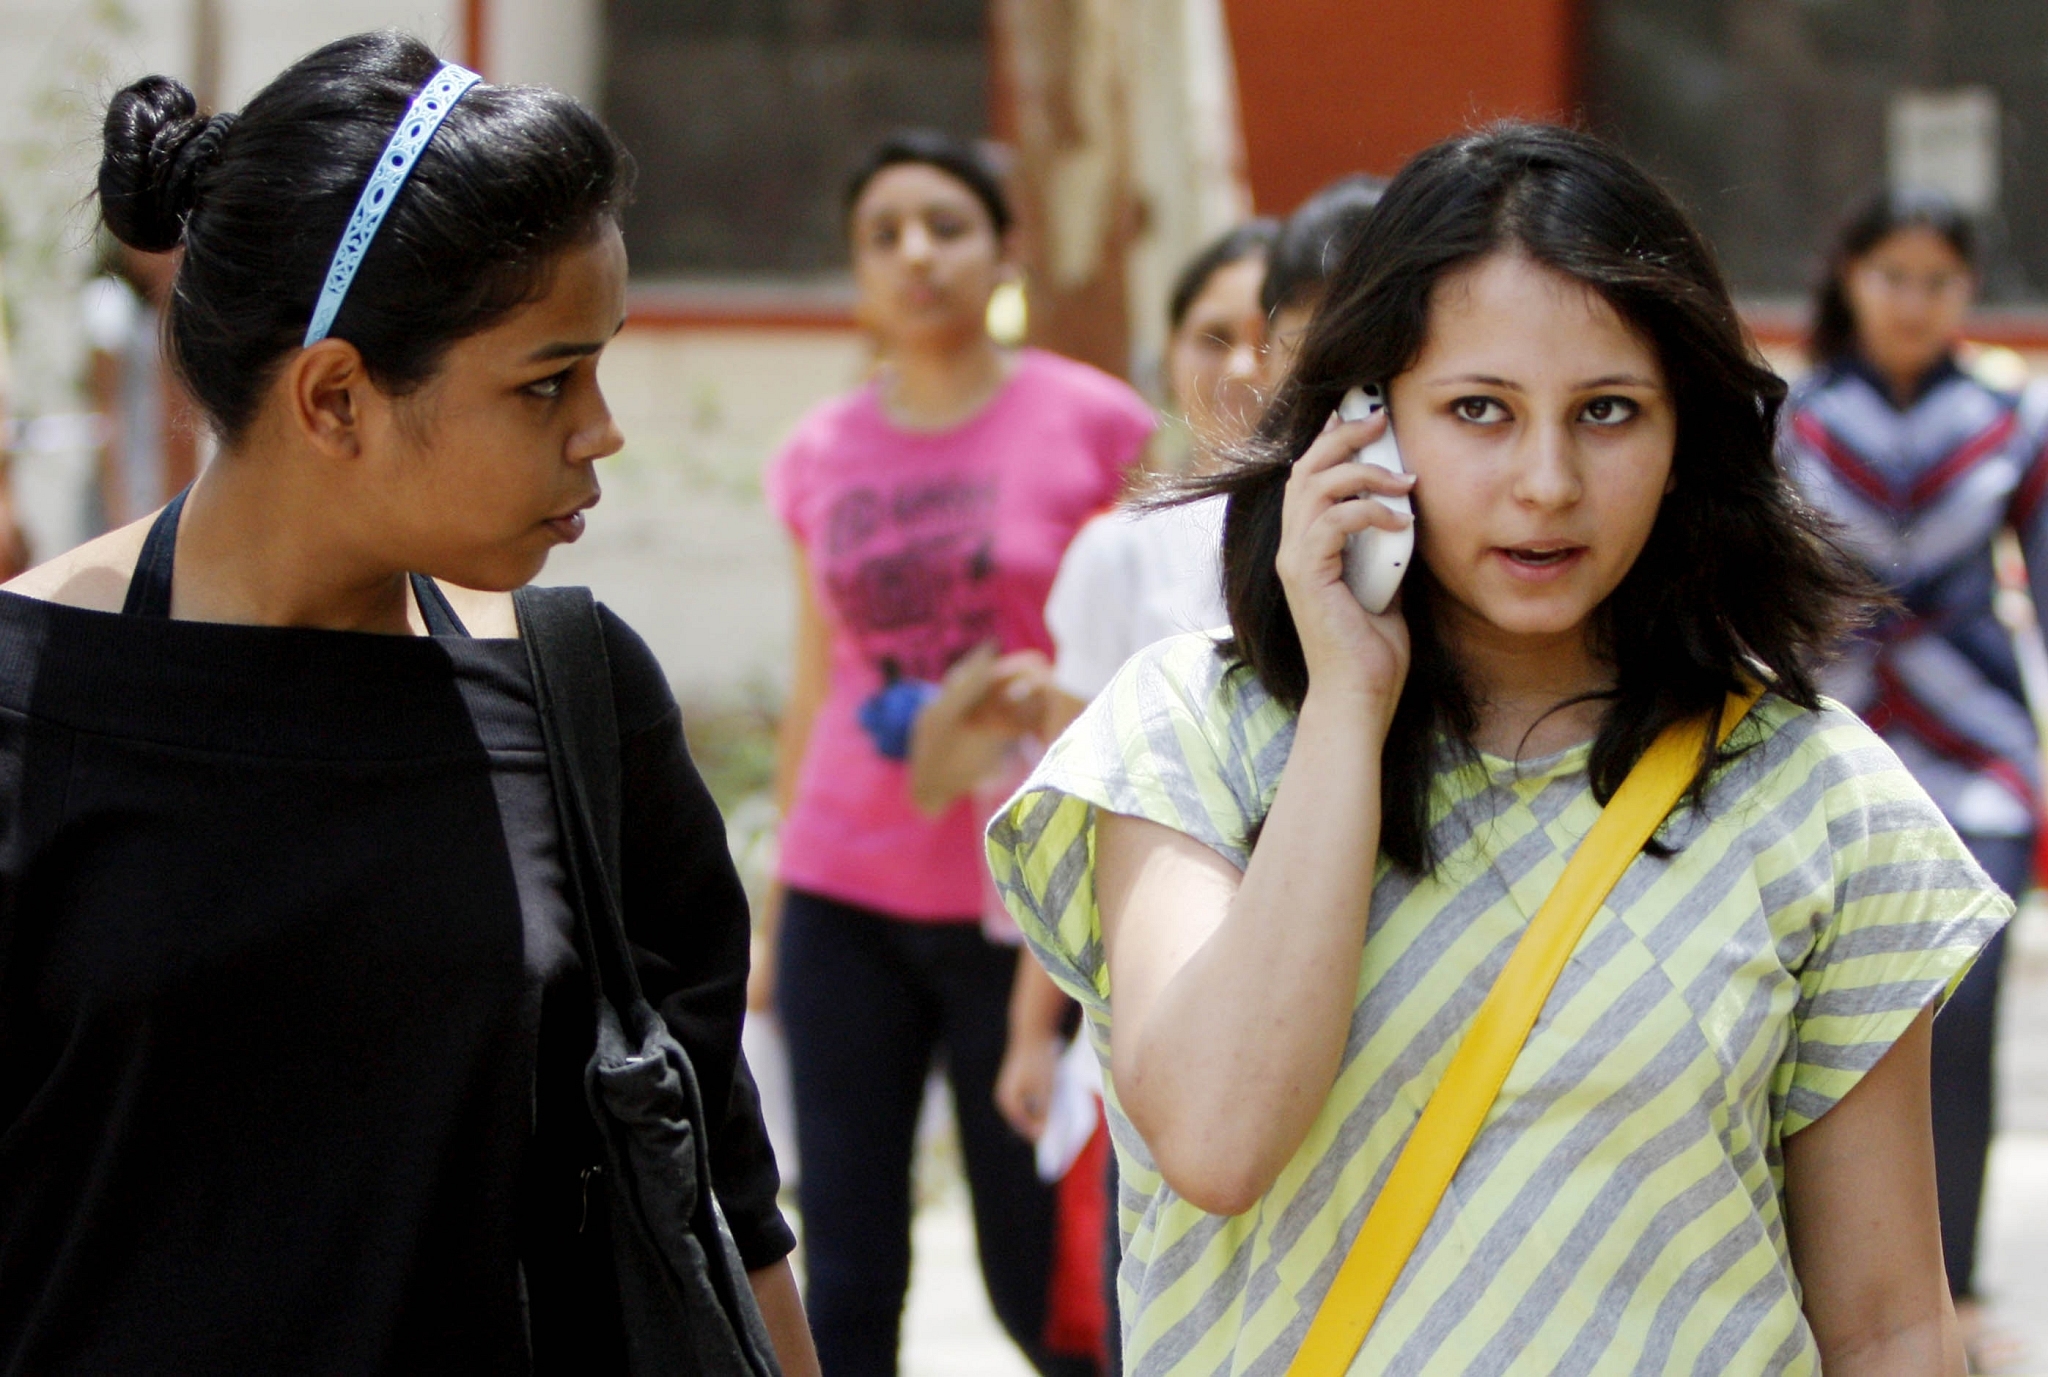 Students after taking the CAT exam. (representative image) (M. Zhazo/ Hindustan Times via Getty Images)